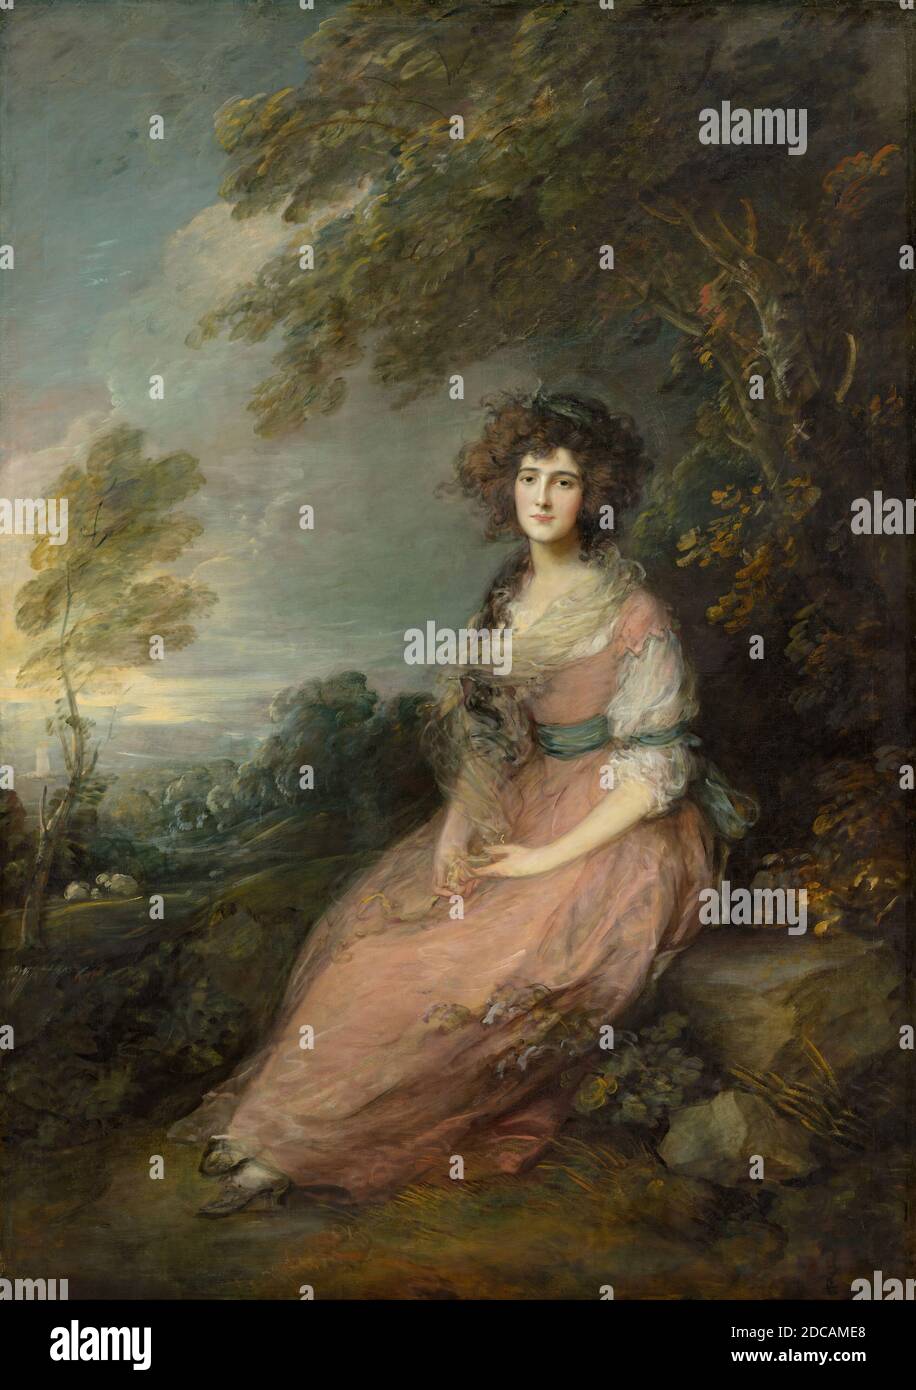 Thomas Gainsborough, (artist), British, 1727 - 1788, Mrs. Richard Brinsley Sheridan, 1785-1787, oil on canvas, overall: 219.7 x 153.7 cm (86 1/2 x 60 1/2 in.), framed: 251.5 x 185.4 x 14 cm (99 x 73 x 5 1/2 in.), Elizabeth Linley's beauty and exceptional soprano voice brought her professional success in concerts and festivals in Bath and London. After marrying Sheridan in 1773 she left her career to support and participate in her husband's activities as politician, playwright, and orator. Sheridan's work was immensely popular Stock Photo